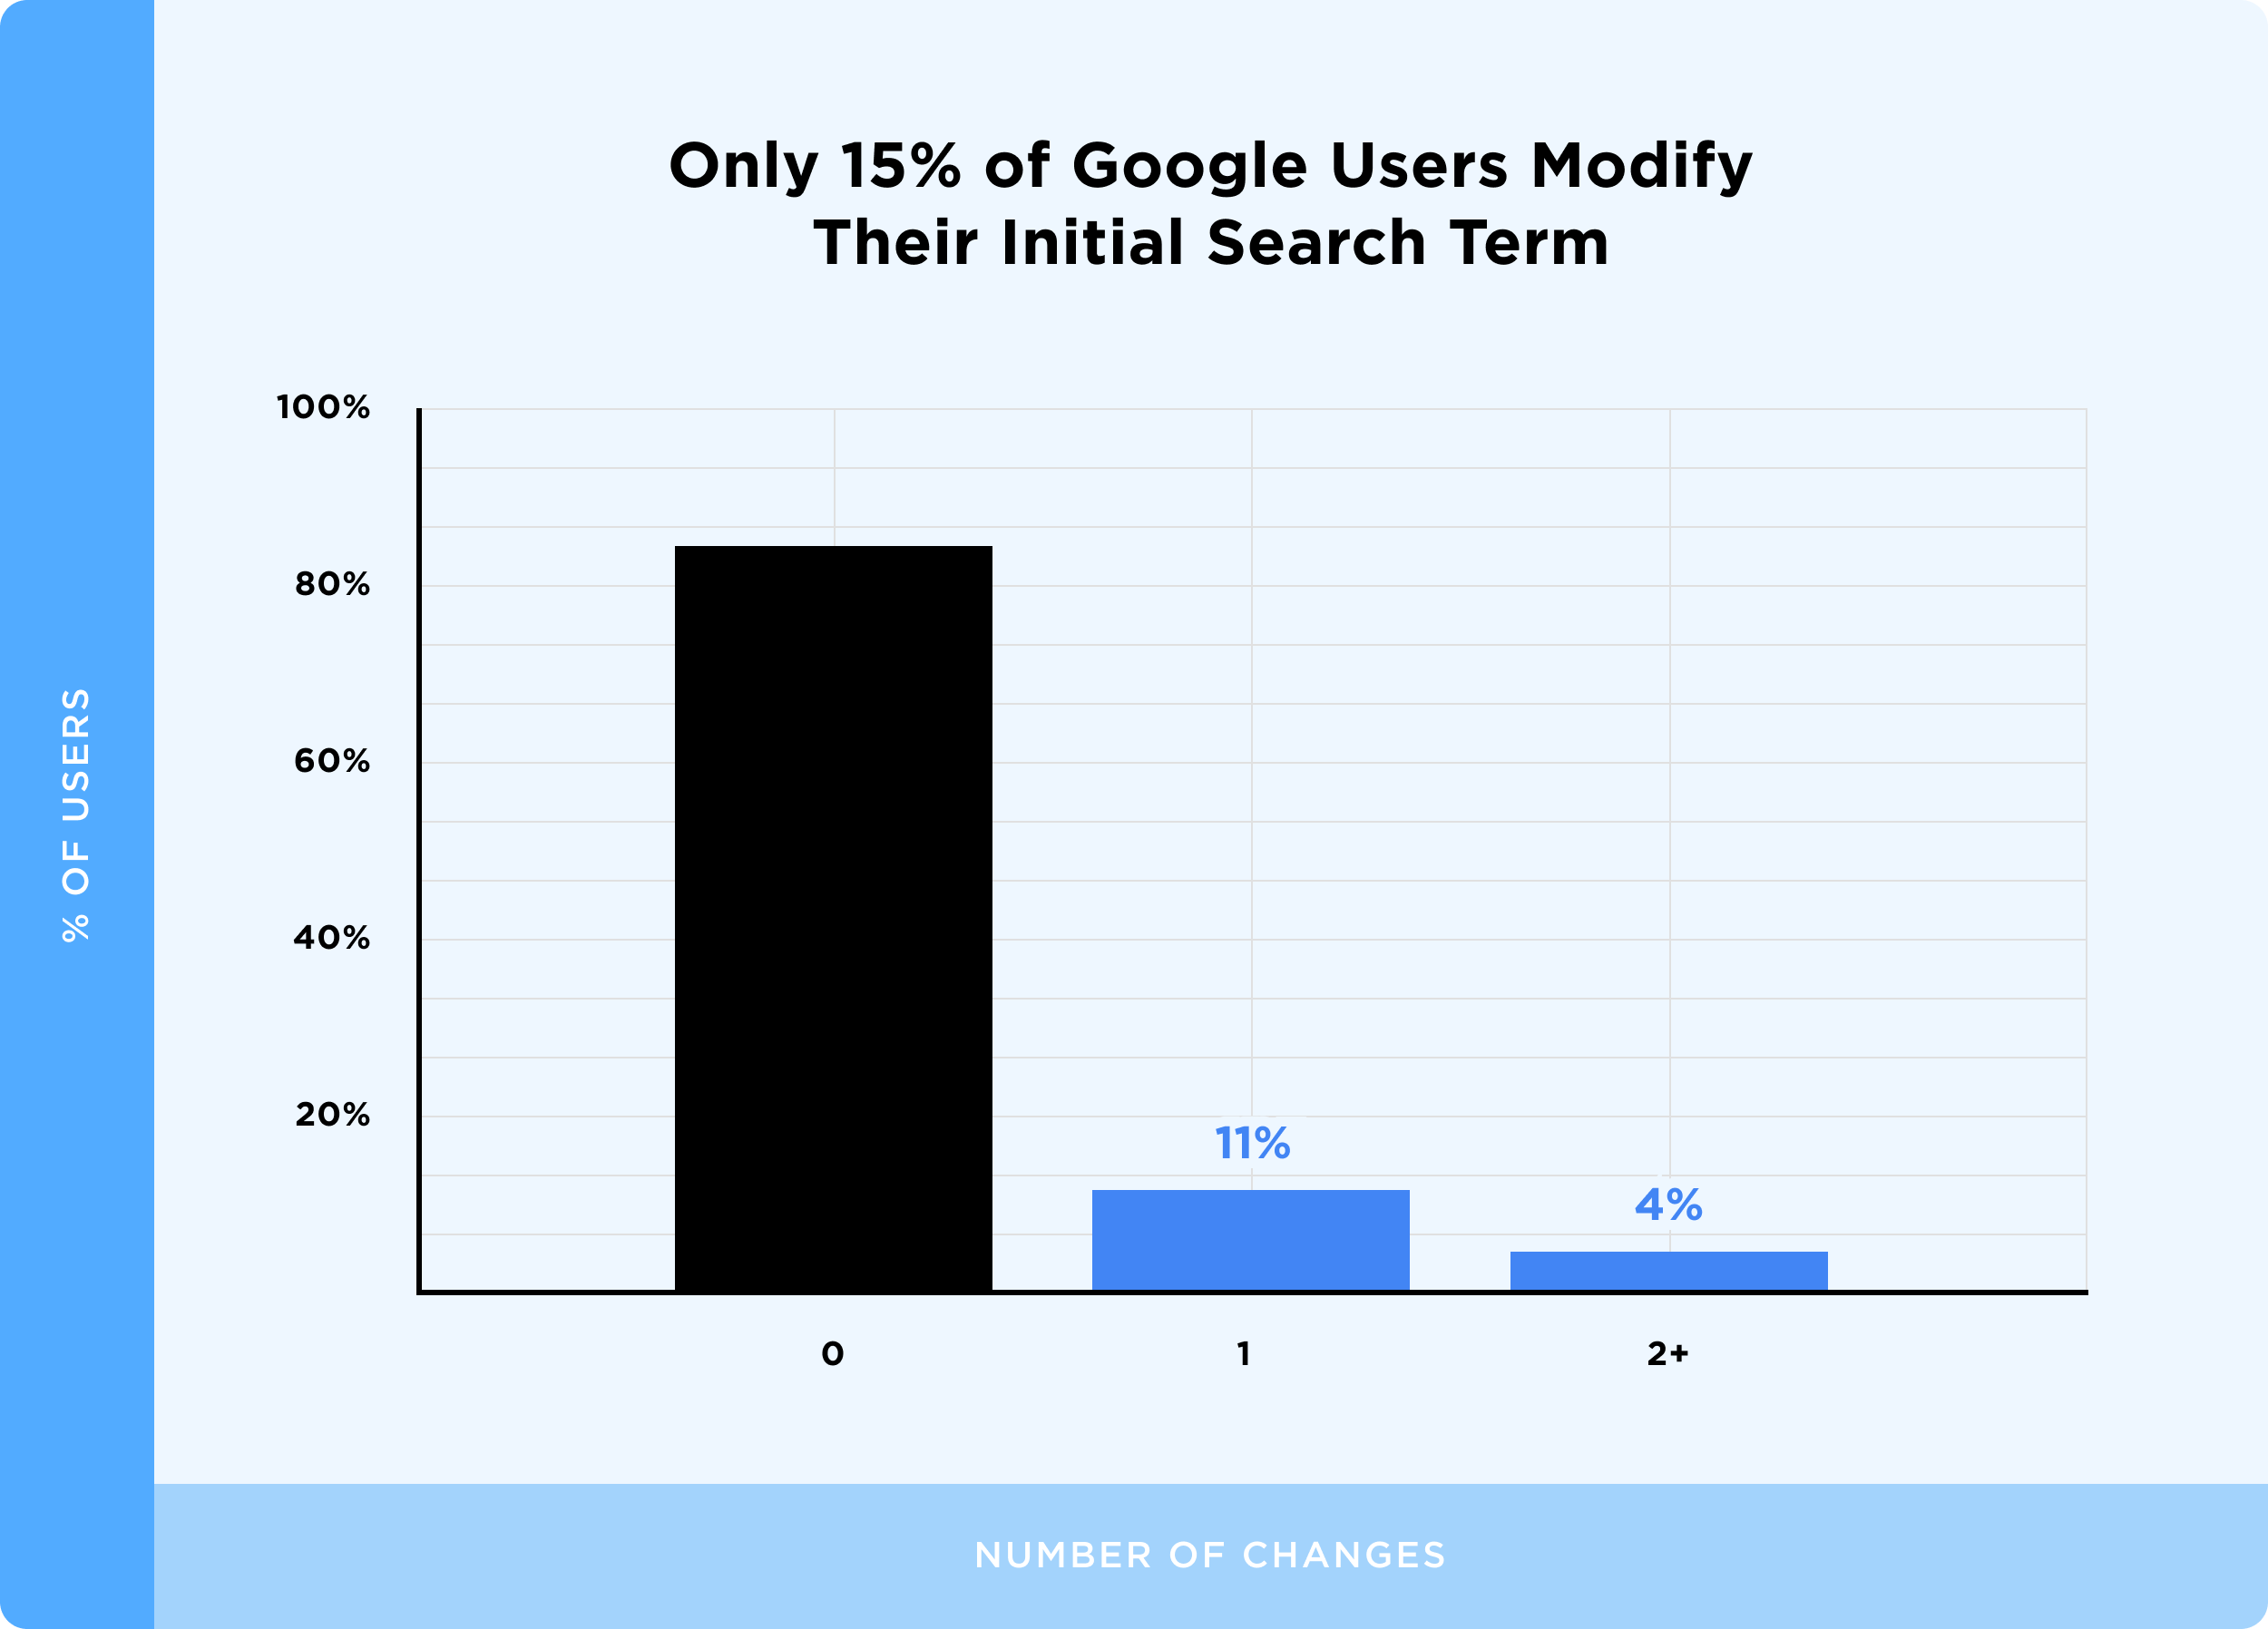 Only 15% of Google Users Modify Their Initial Search Term